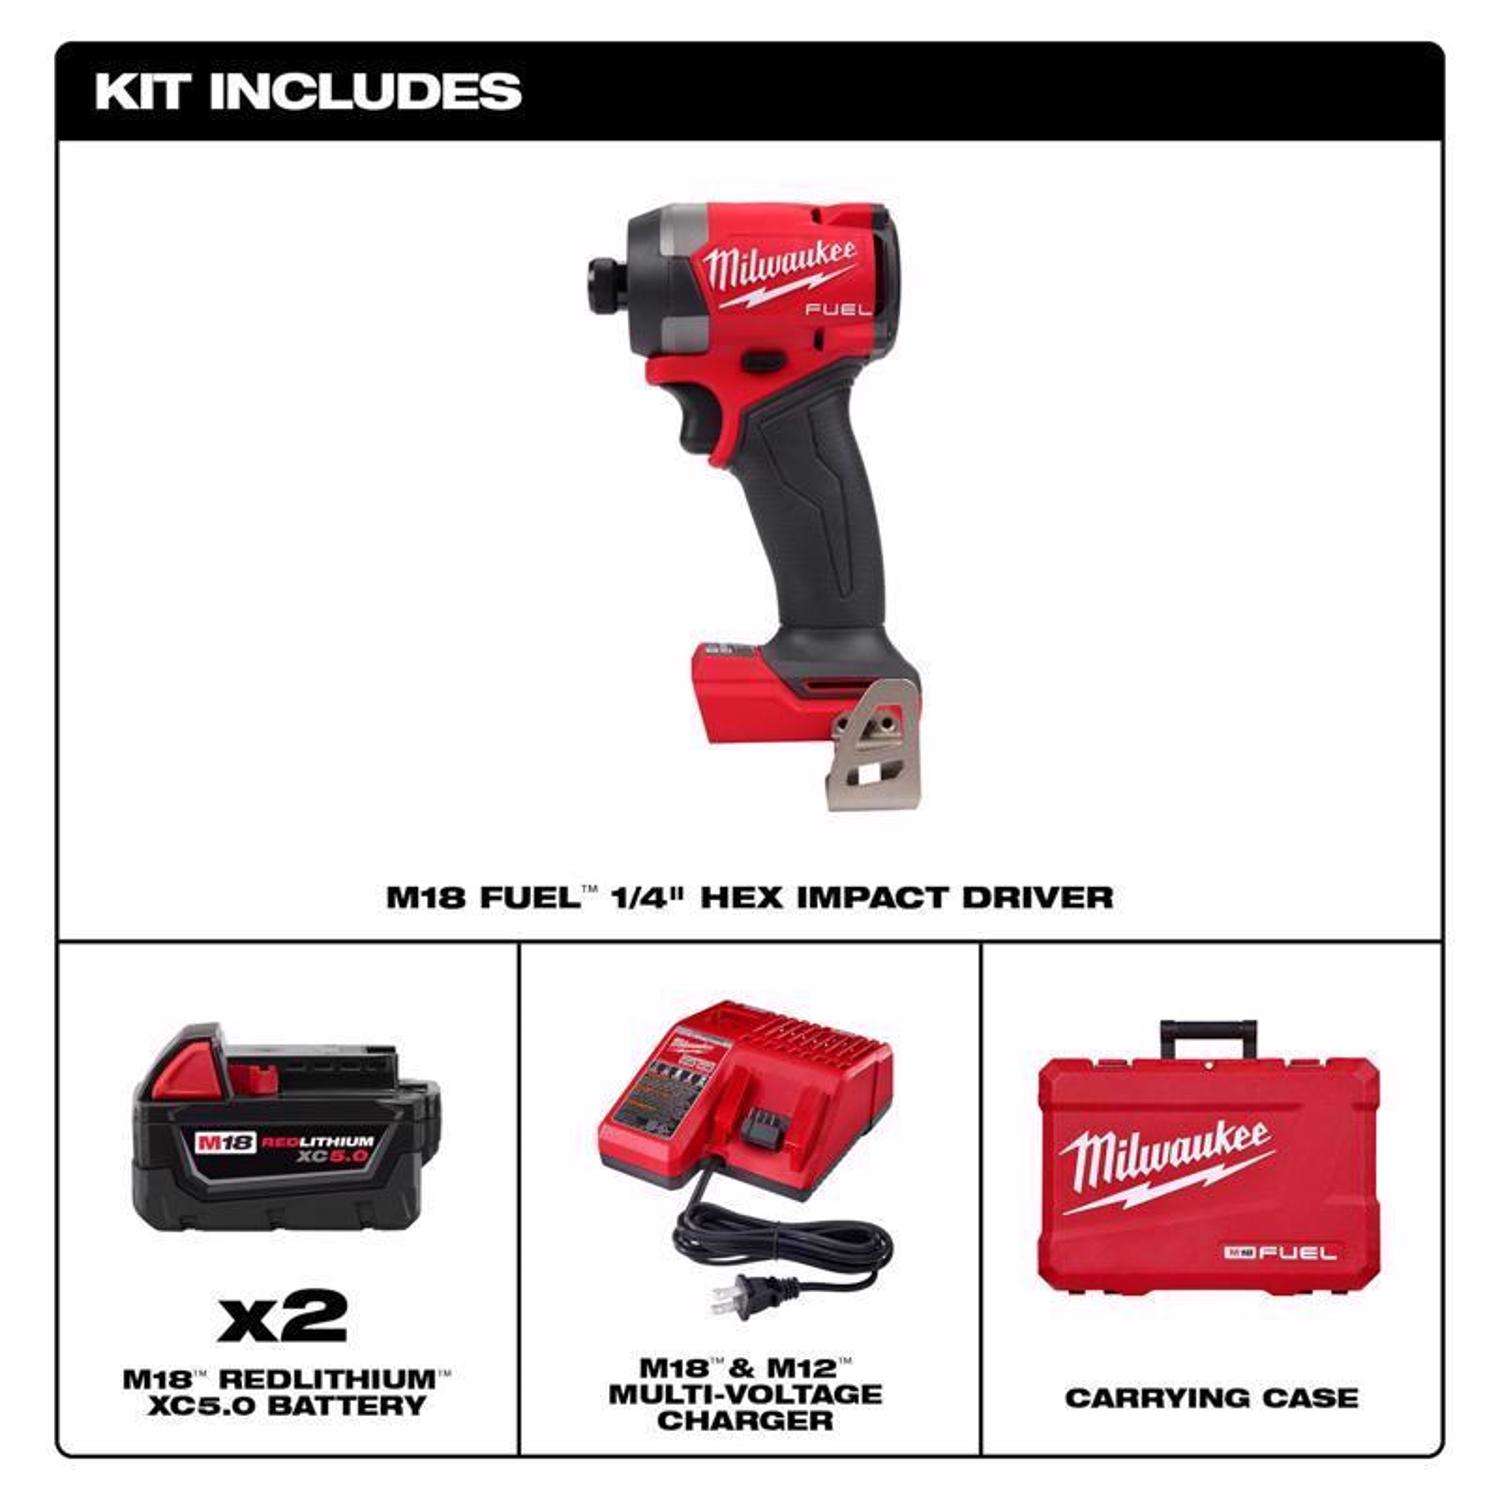 MILWAUKEE BATTERY POWERED GLUE GUN WITH VARIABLE HEAT CONTROLLER - ProPDR